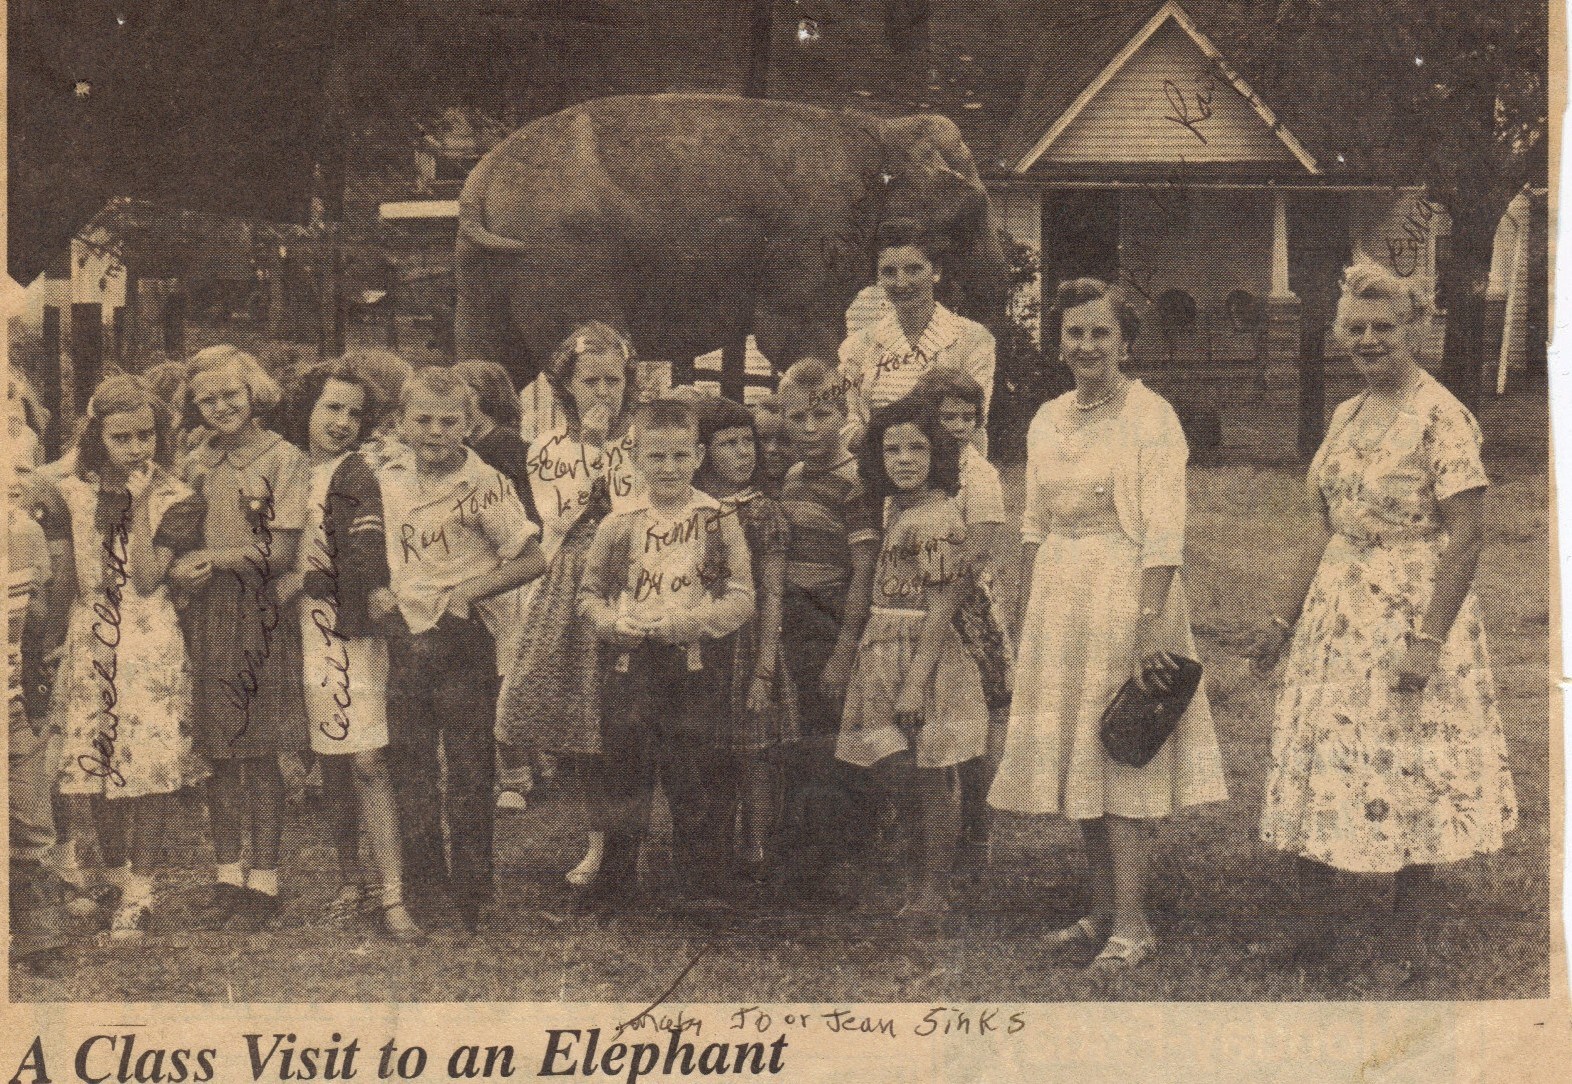 Houston County, TN class visits the circus and the elephants